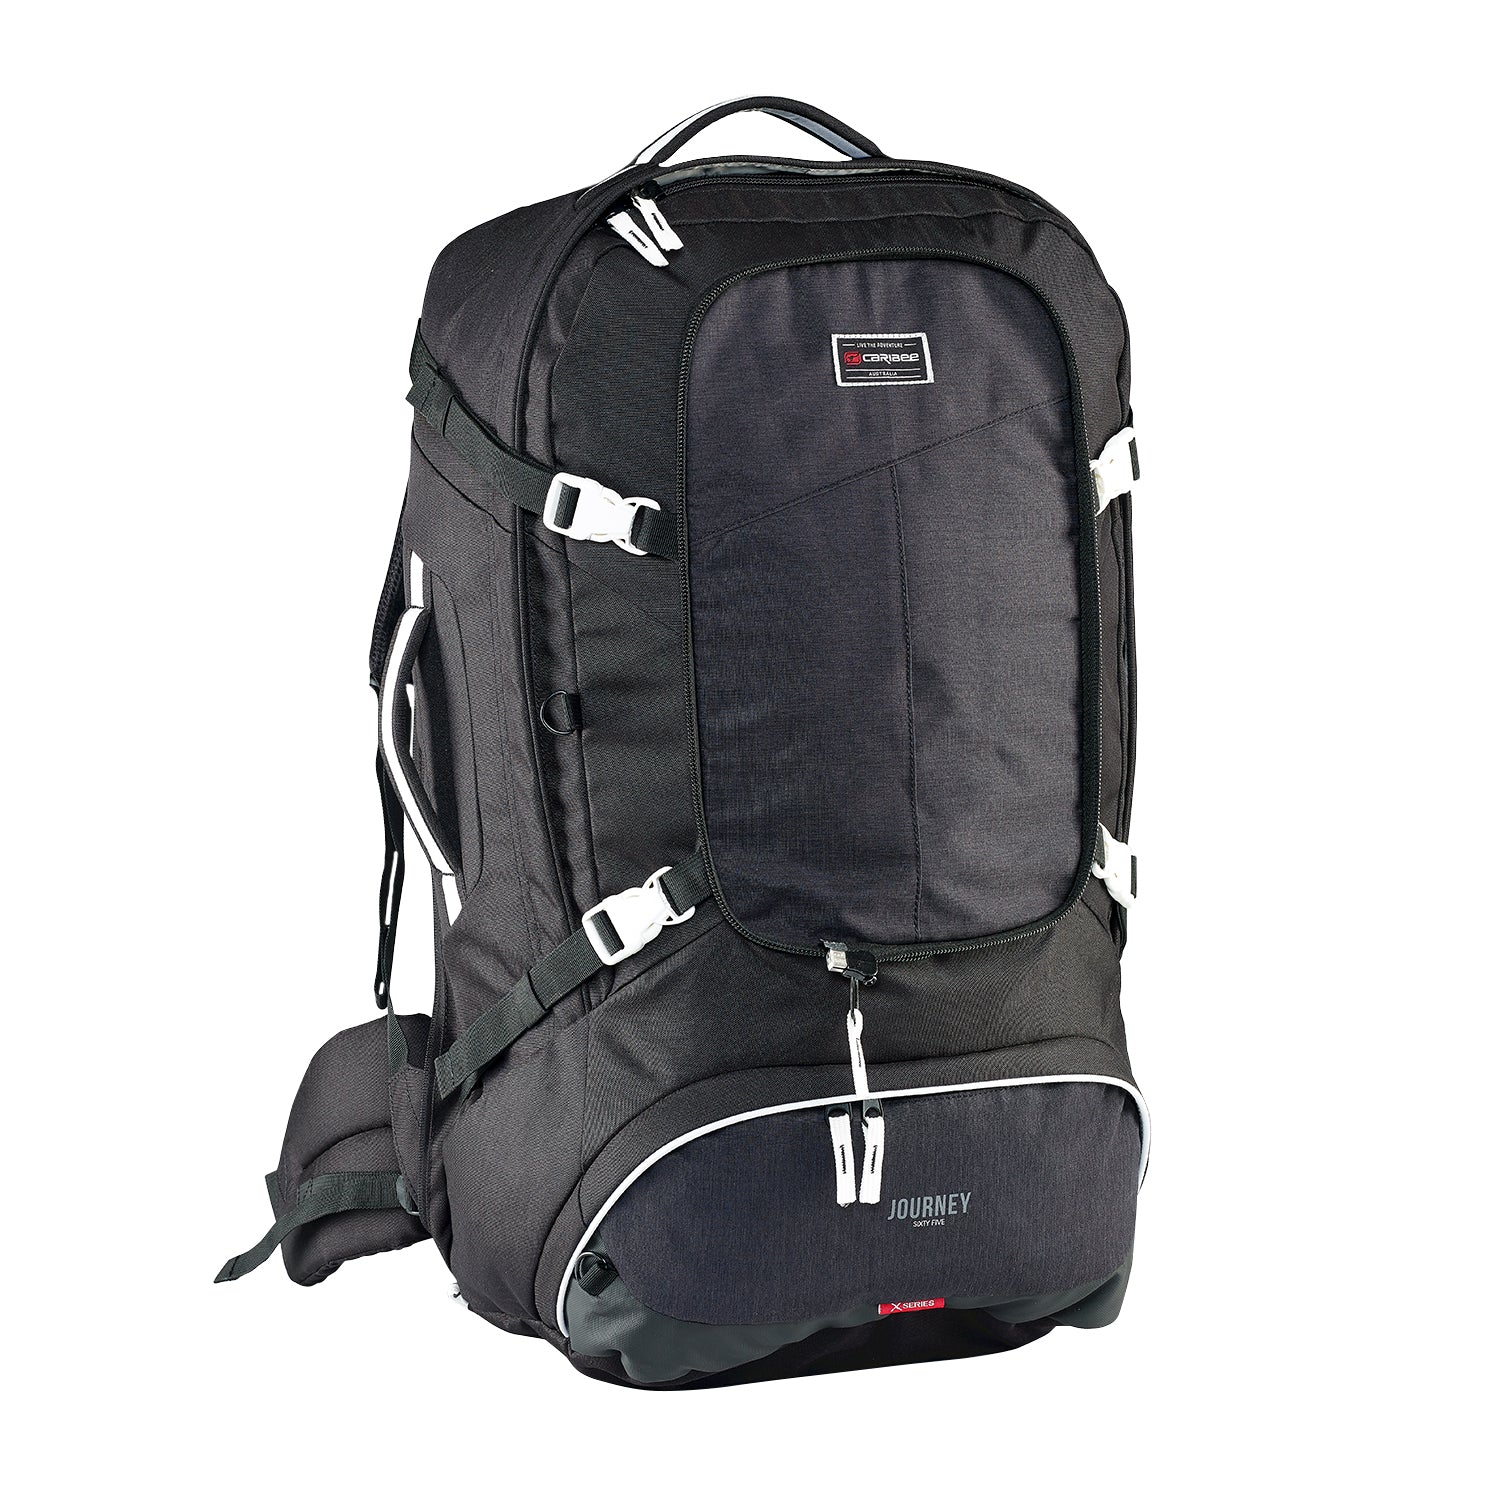 Caribee Journey 75L travel pack black front with no daypack